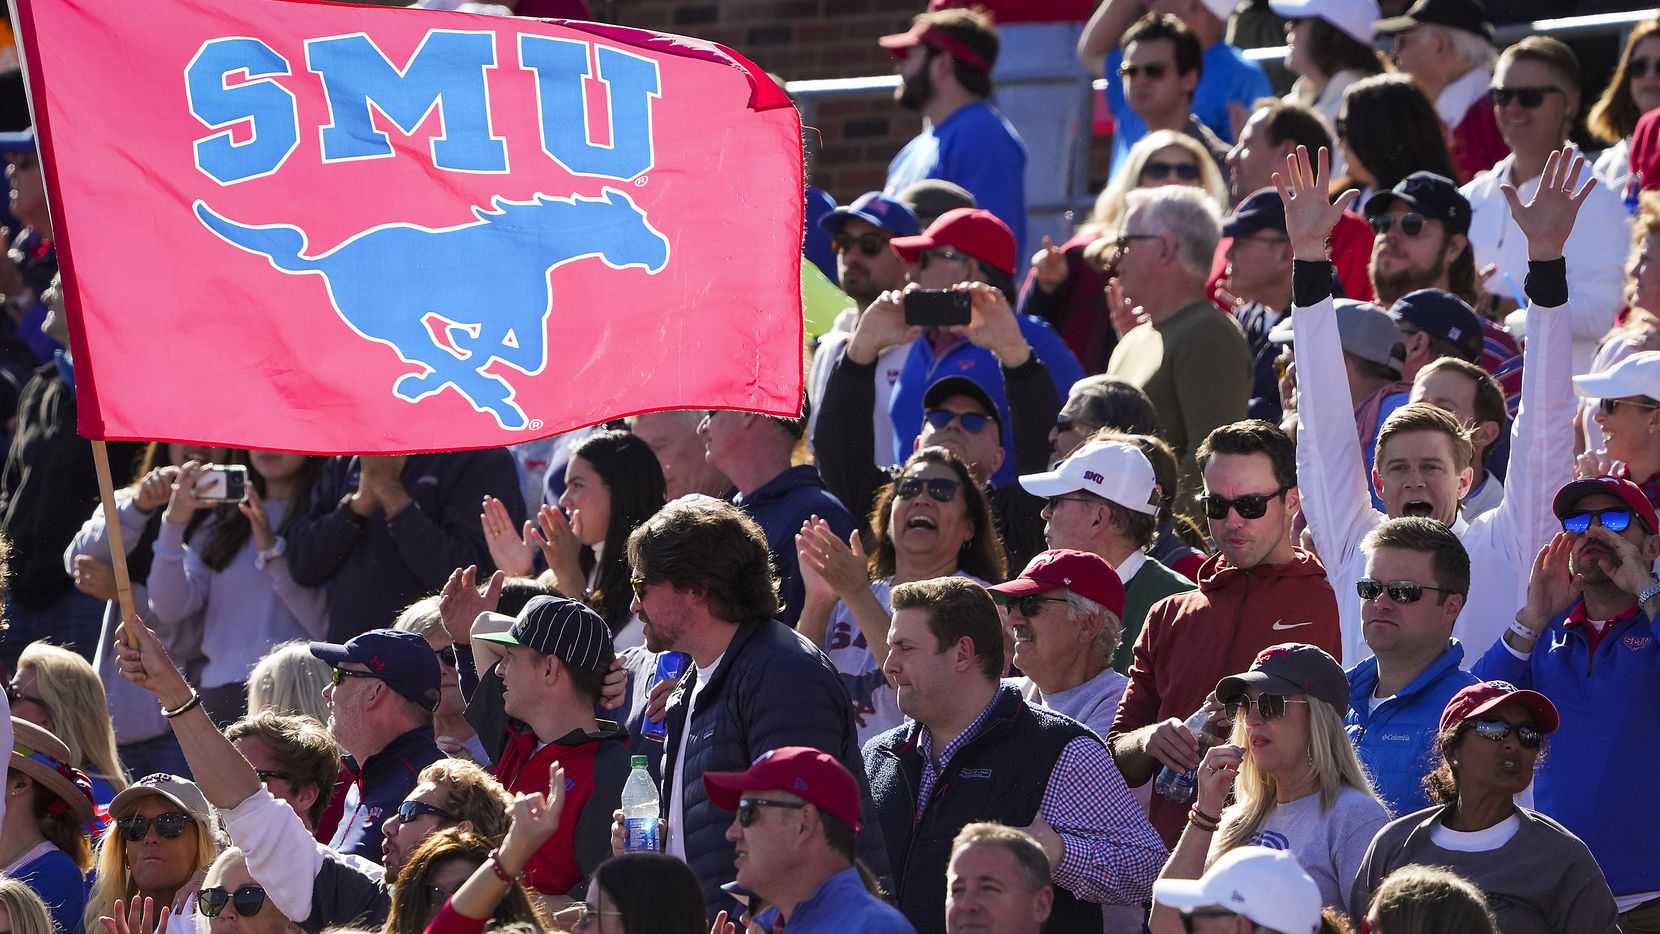 SMU fans celebrate a touchdown catch by wide receiver Reggie Roberson Jr. during the second half of an NCAA football game against UCF at Ford Stadium on Nov. 13, 2021, in Dallas. The Mustangs won the game 55-28.